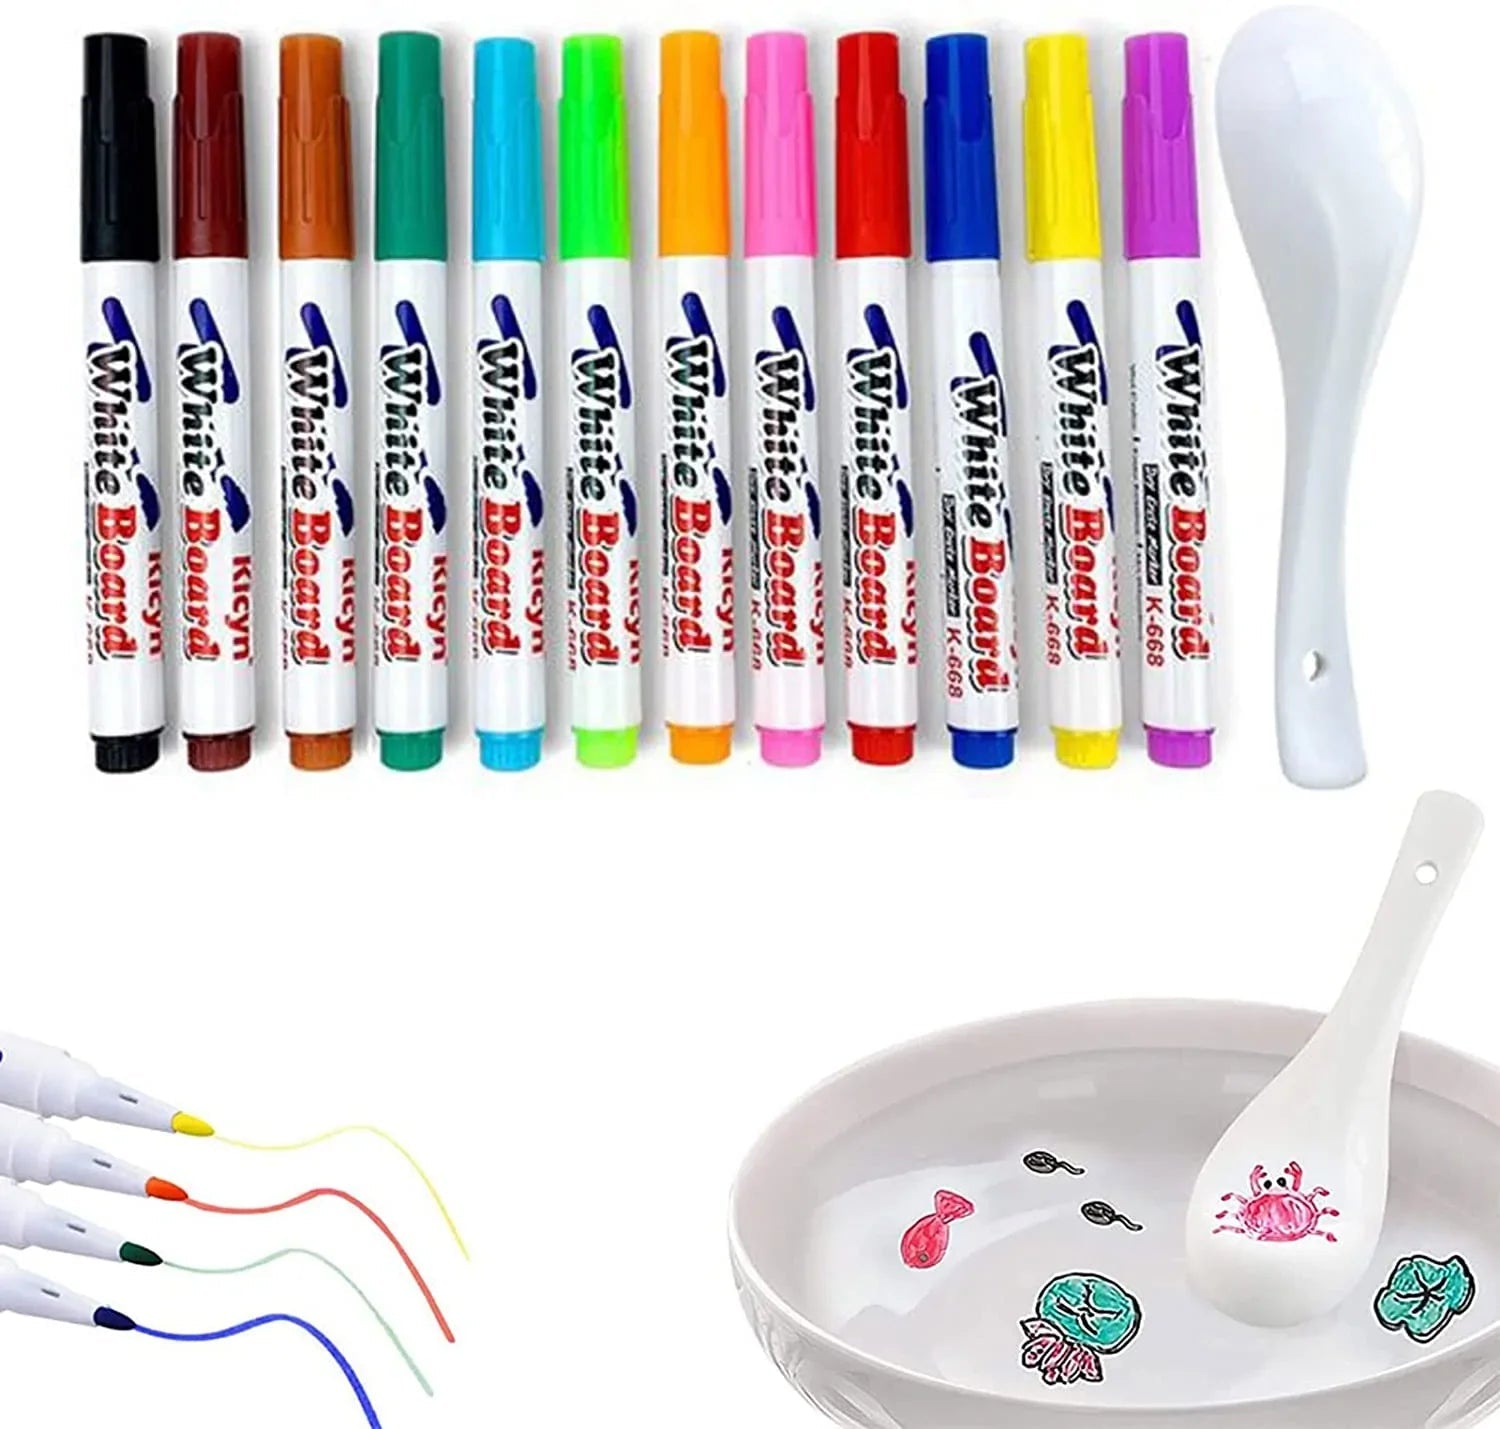 12 Colors Magical Water Painting Pen - Givemethisnow